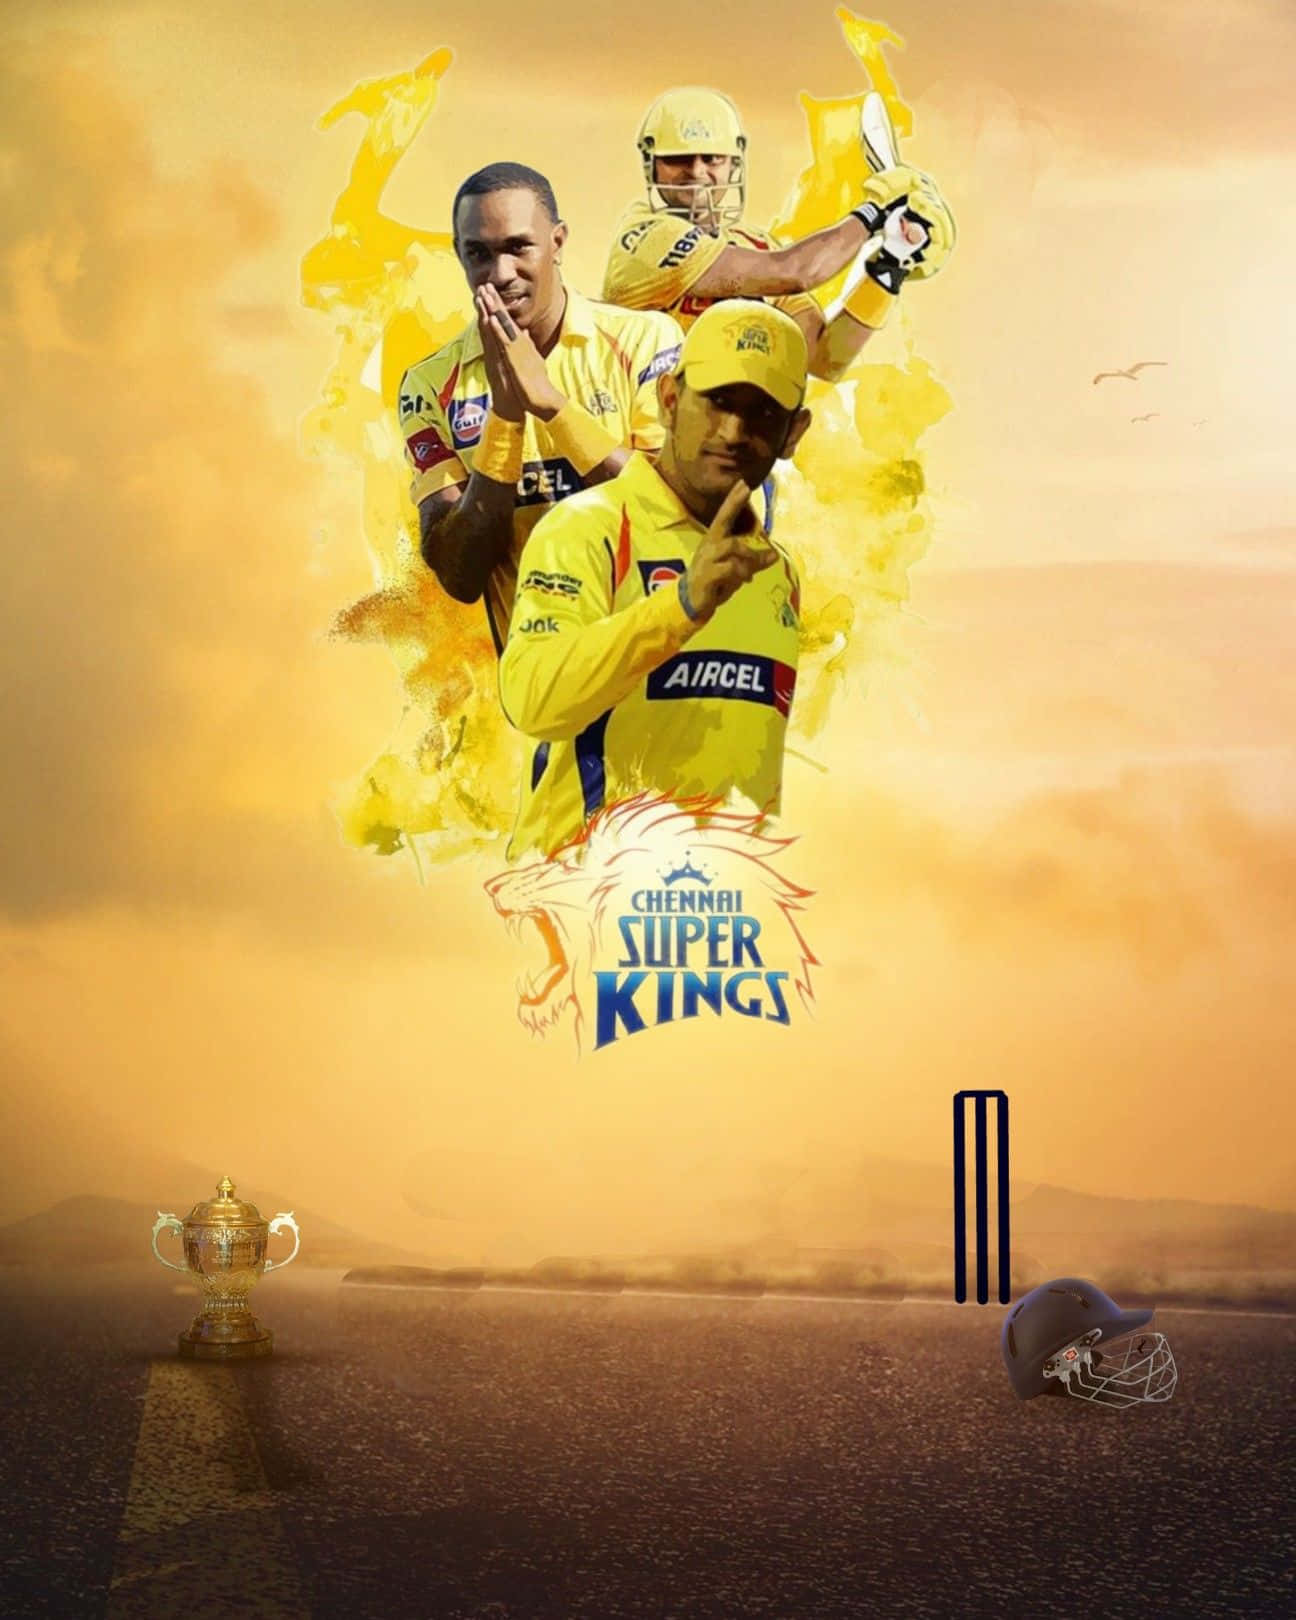 Chennai Super Kings in action - The pride of the IPL